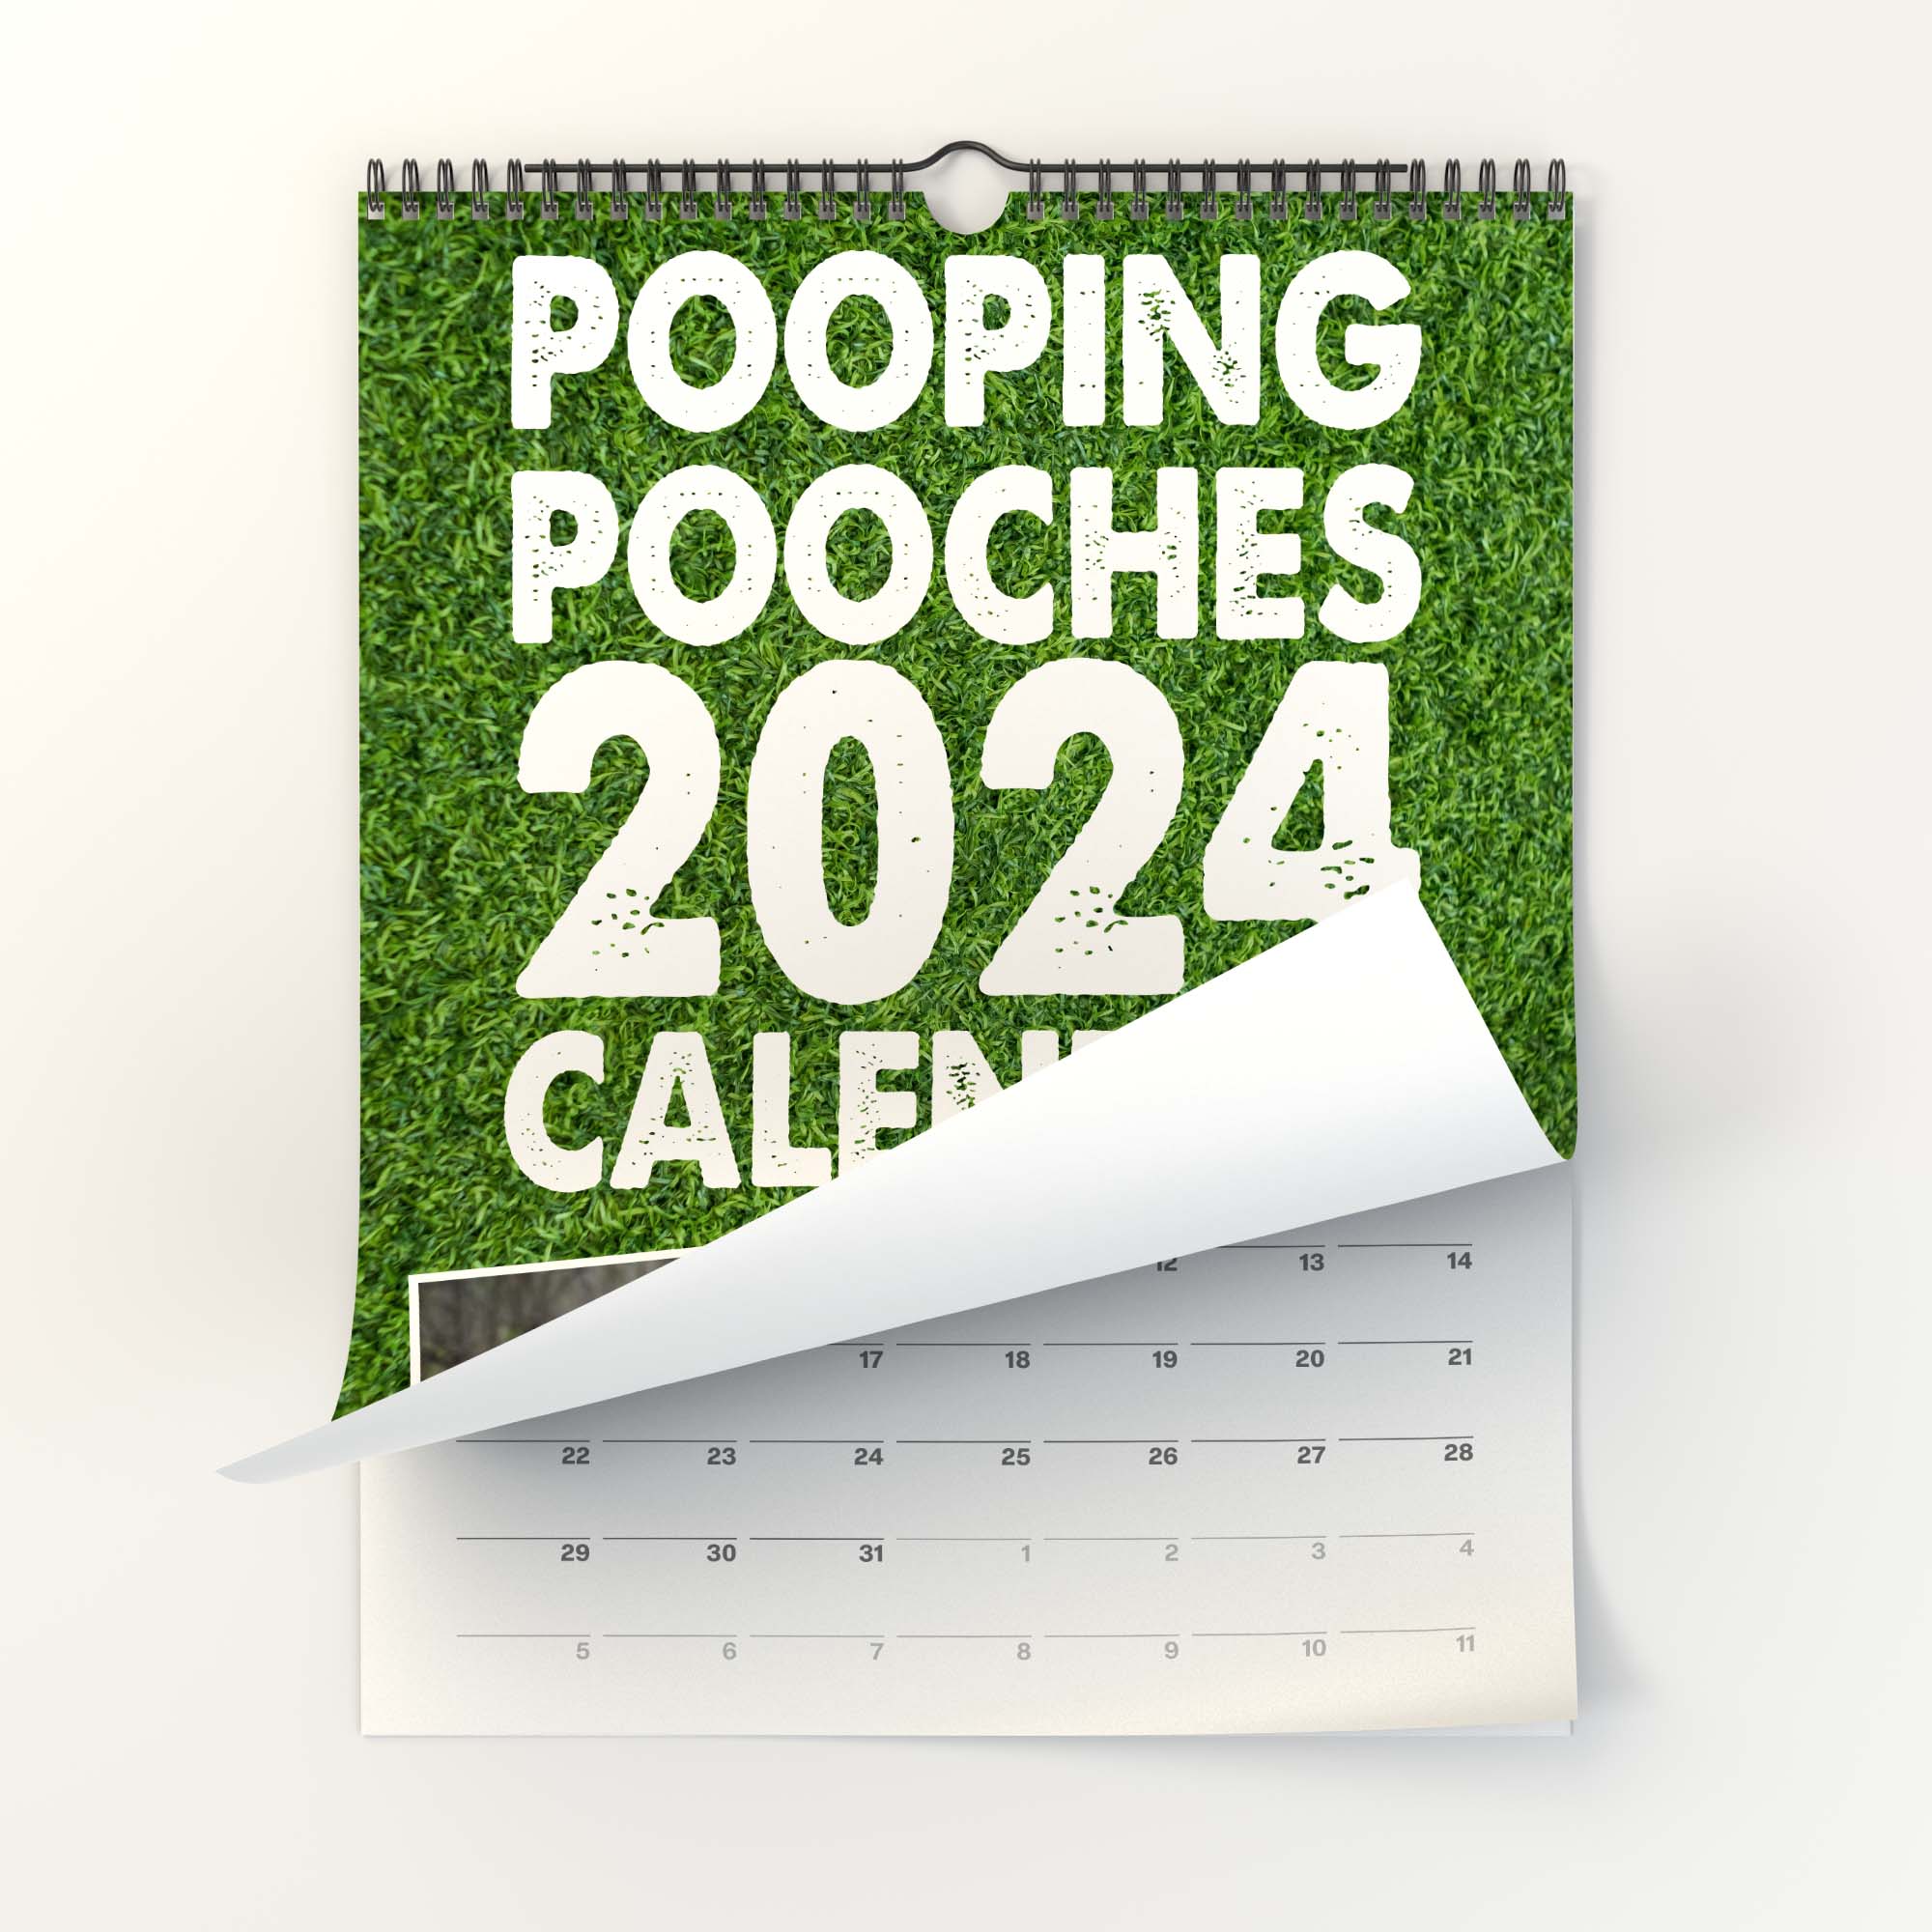 Pooping Pooches Wall Calendar